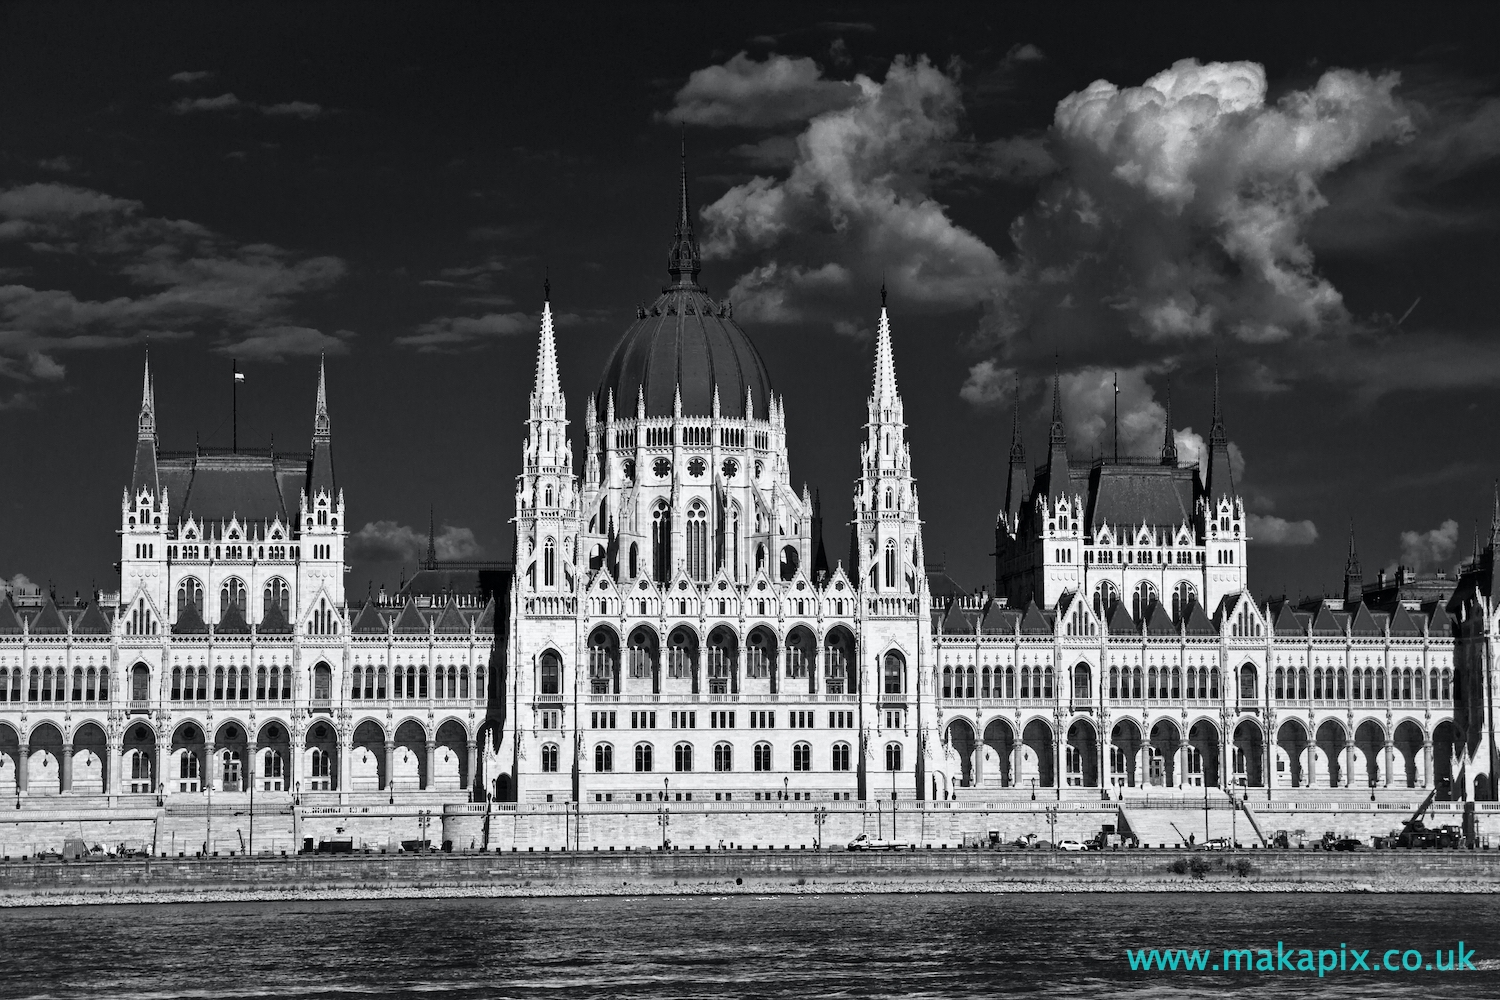 The Budapest Parliament Building in black and white